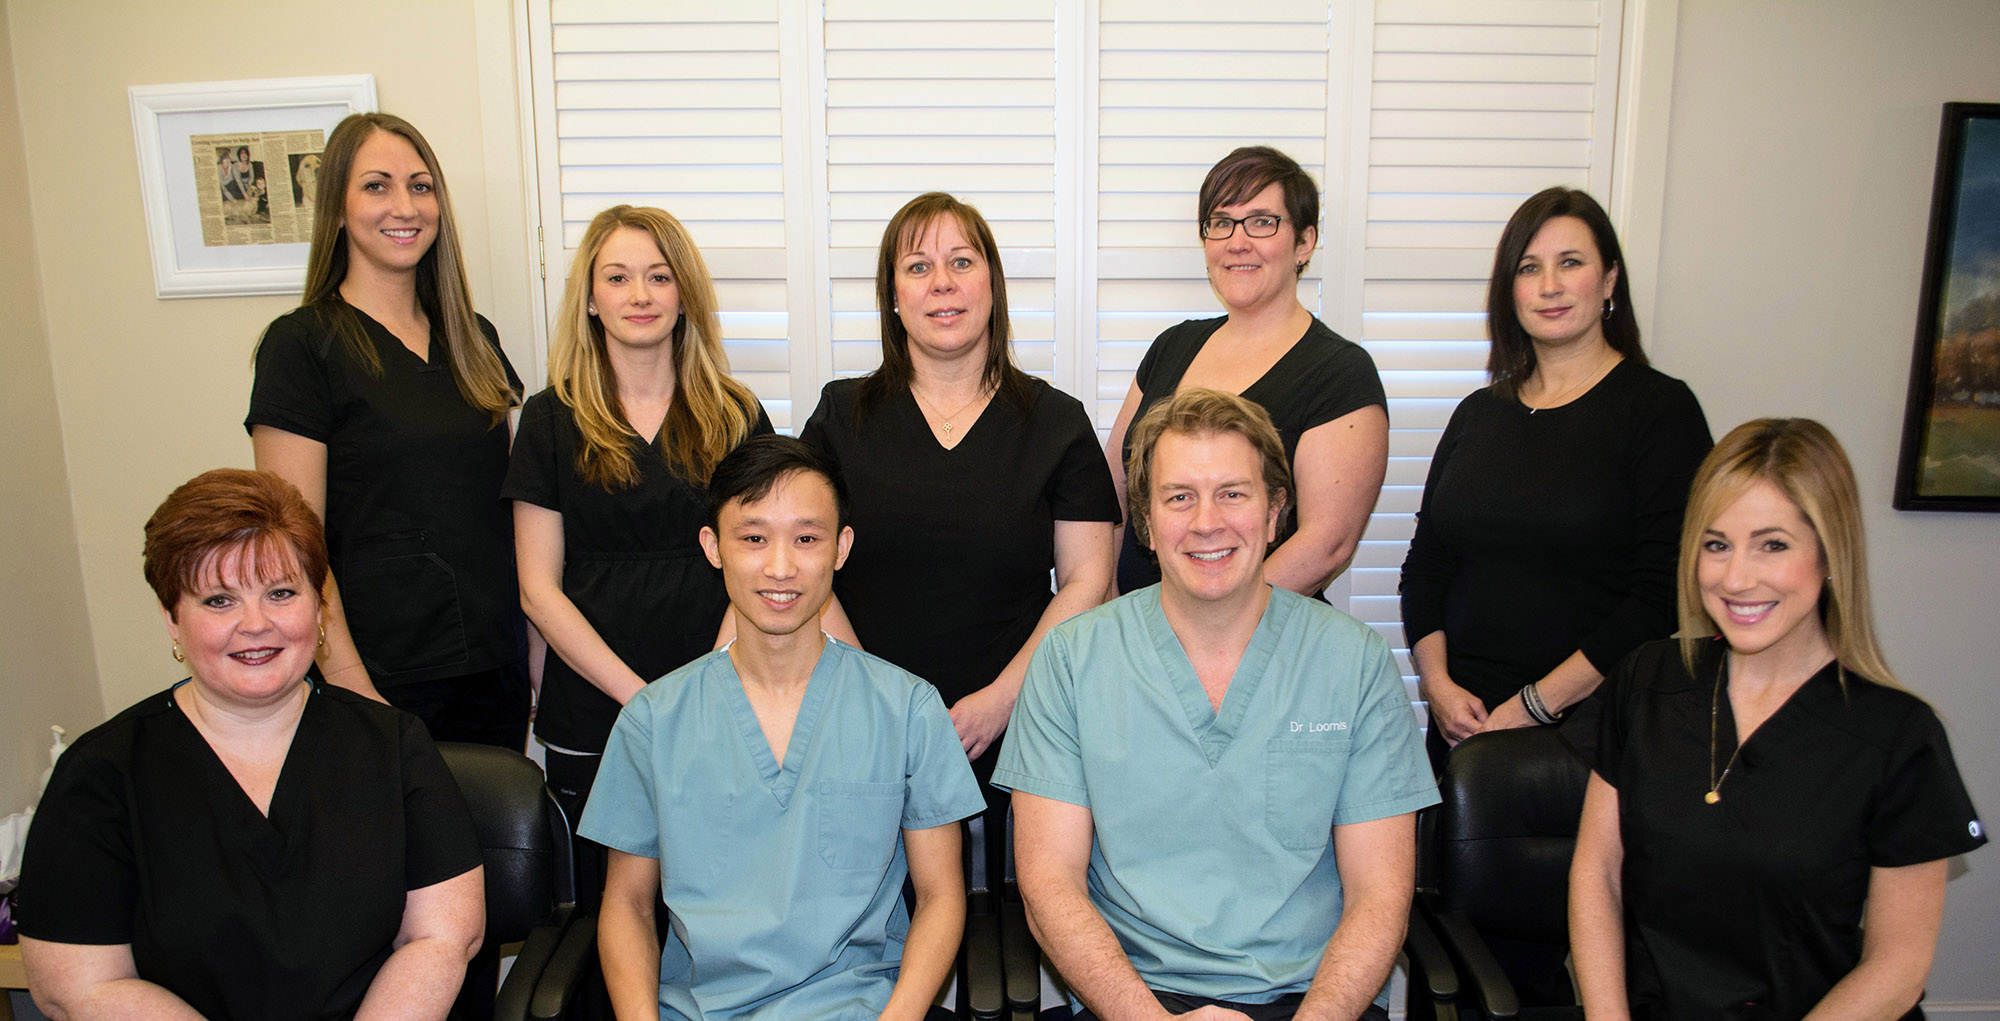 Welcome to Cayuga Family Dental Care